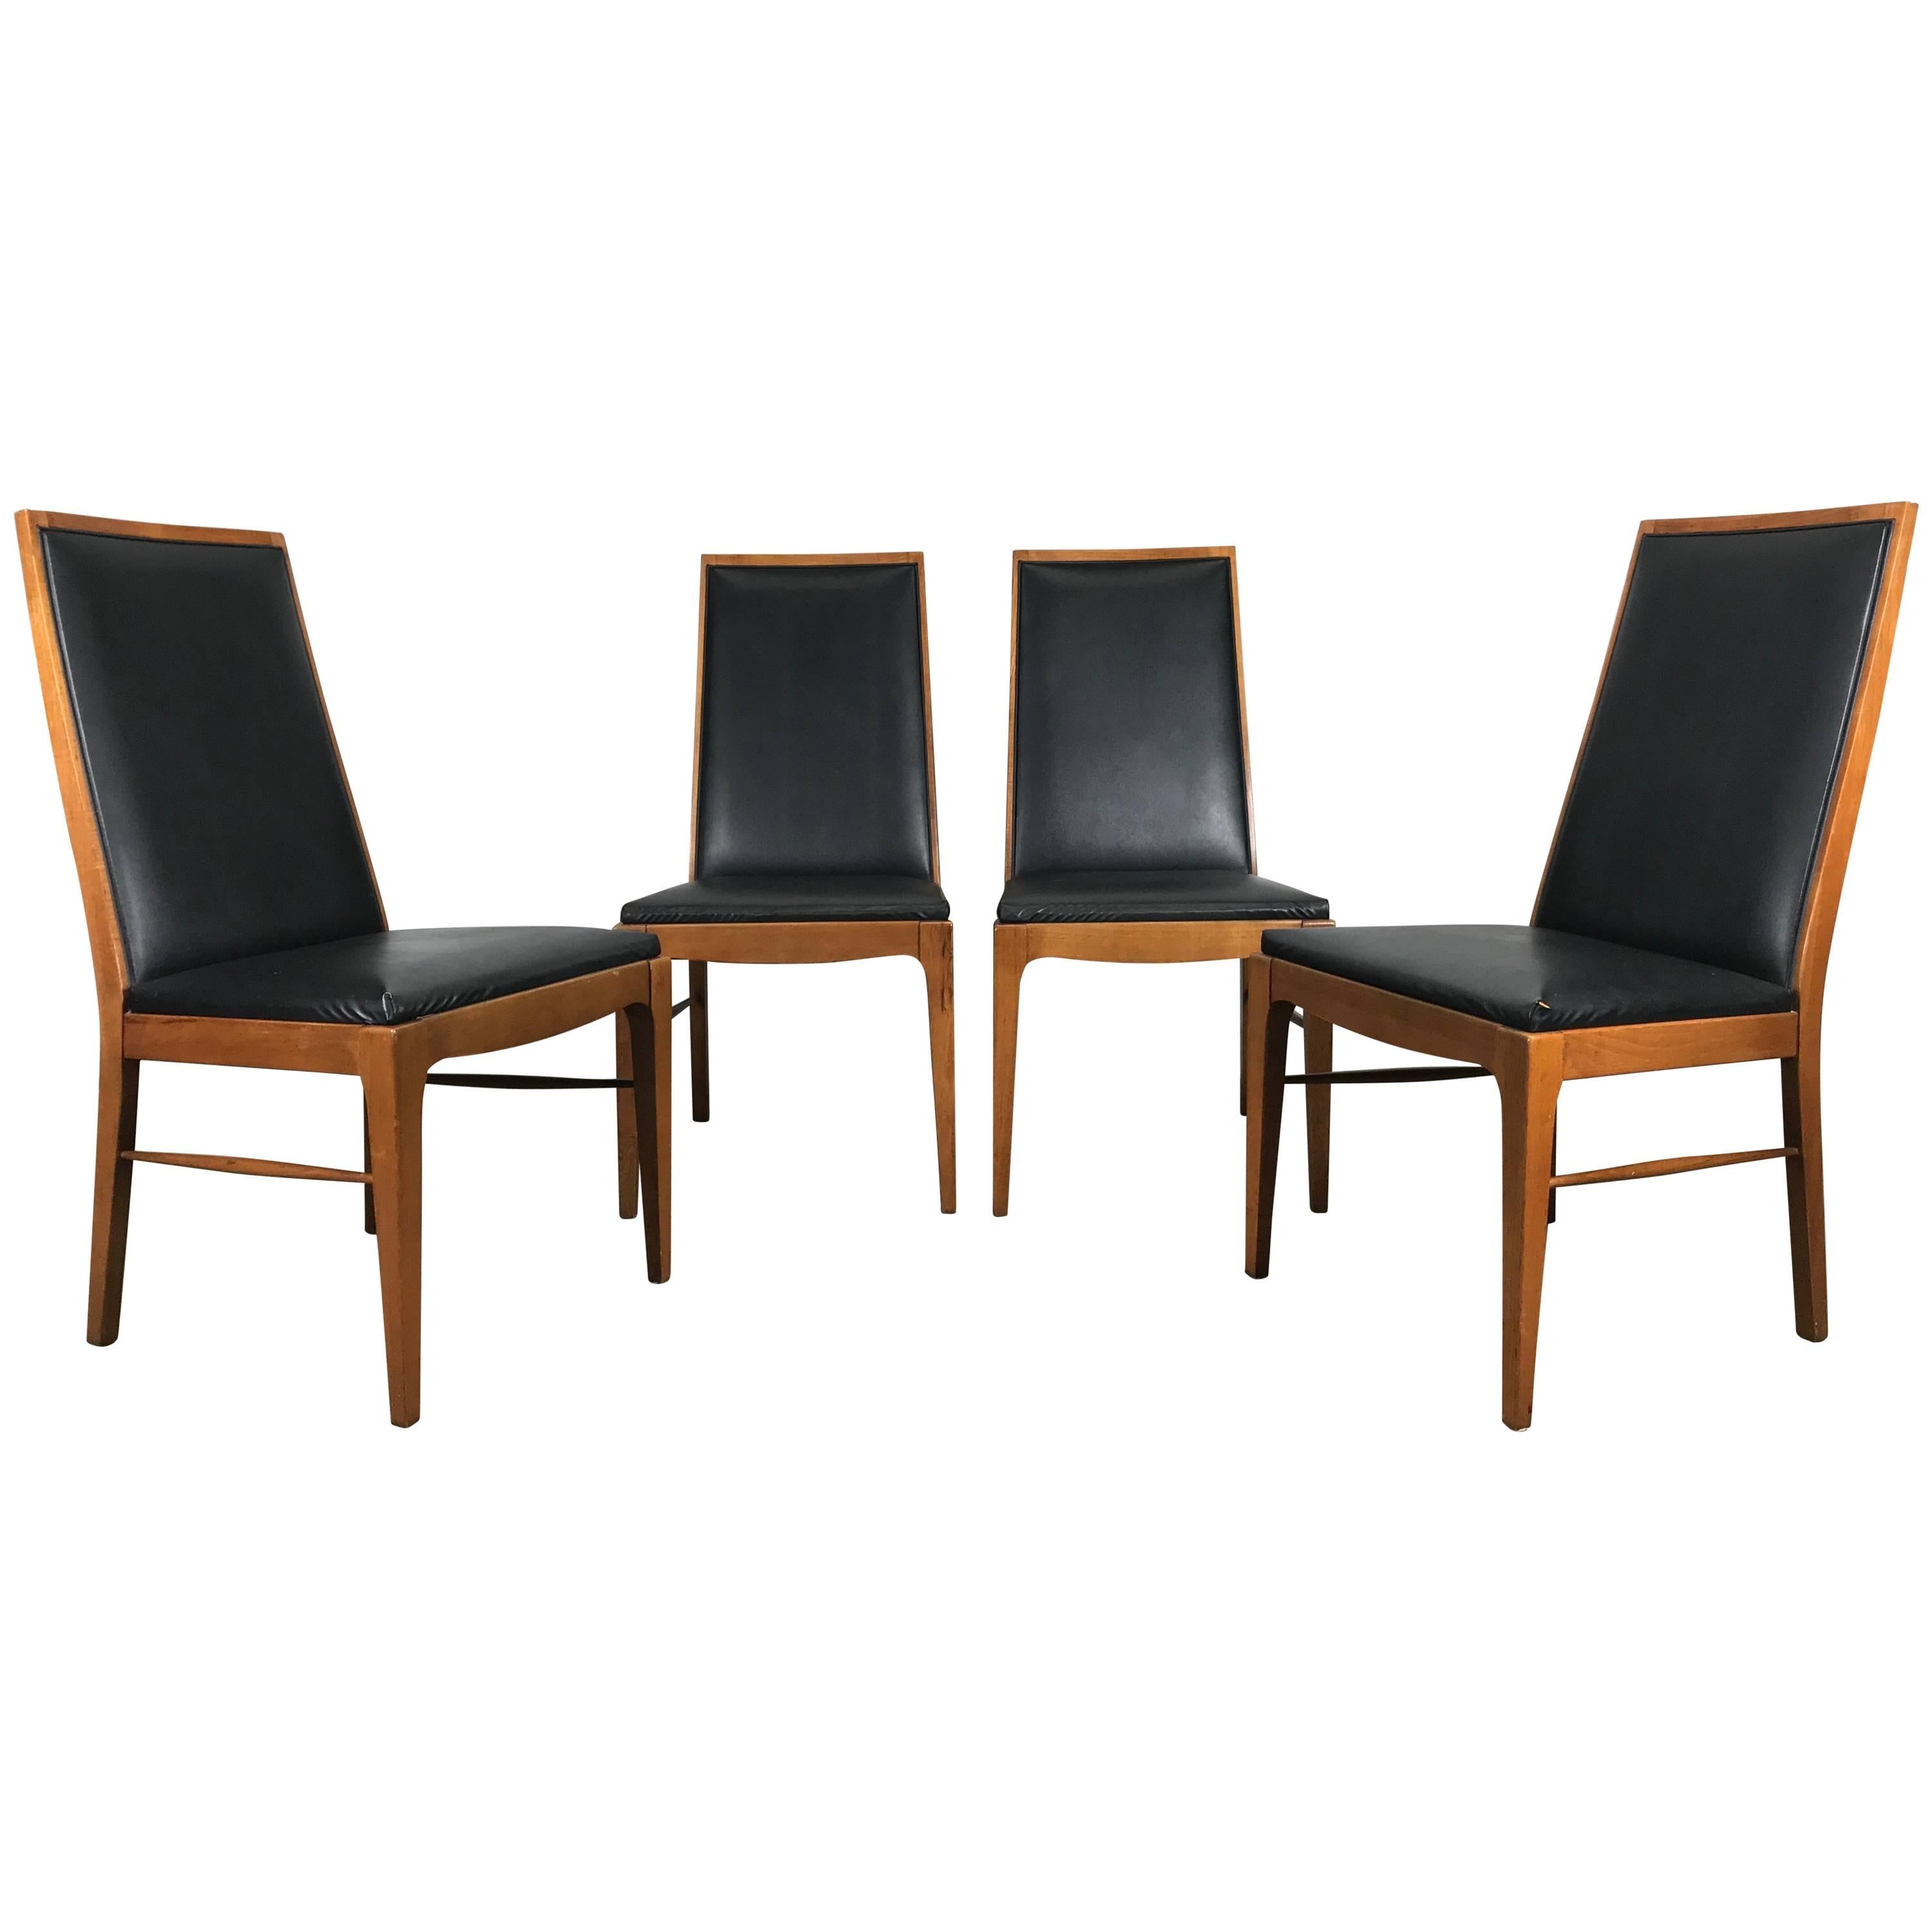 Set of Four Modernist Walnut Dining Chairs by Lane For Sale